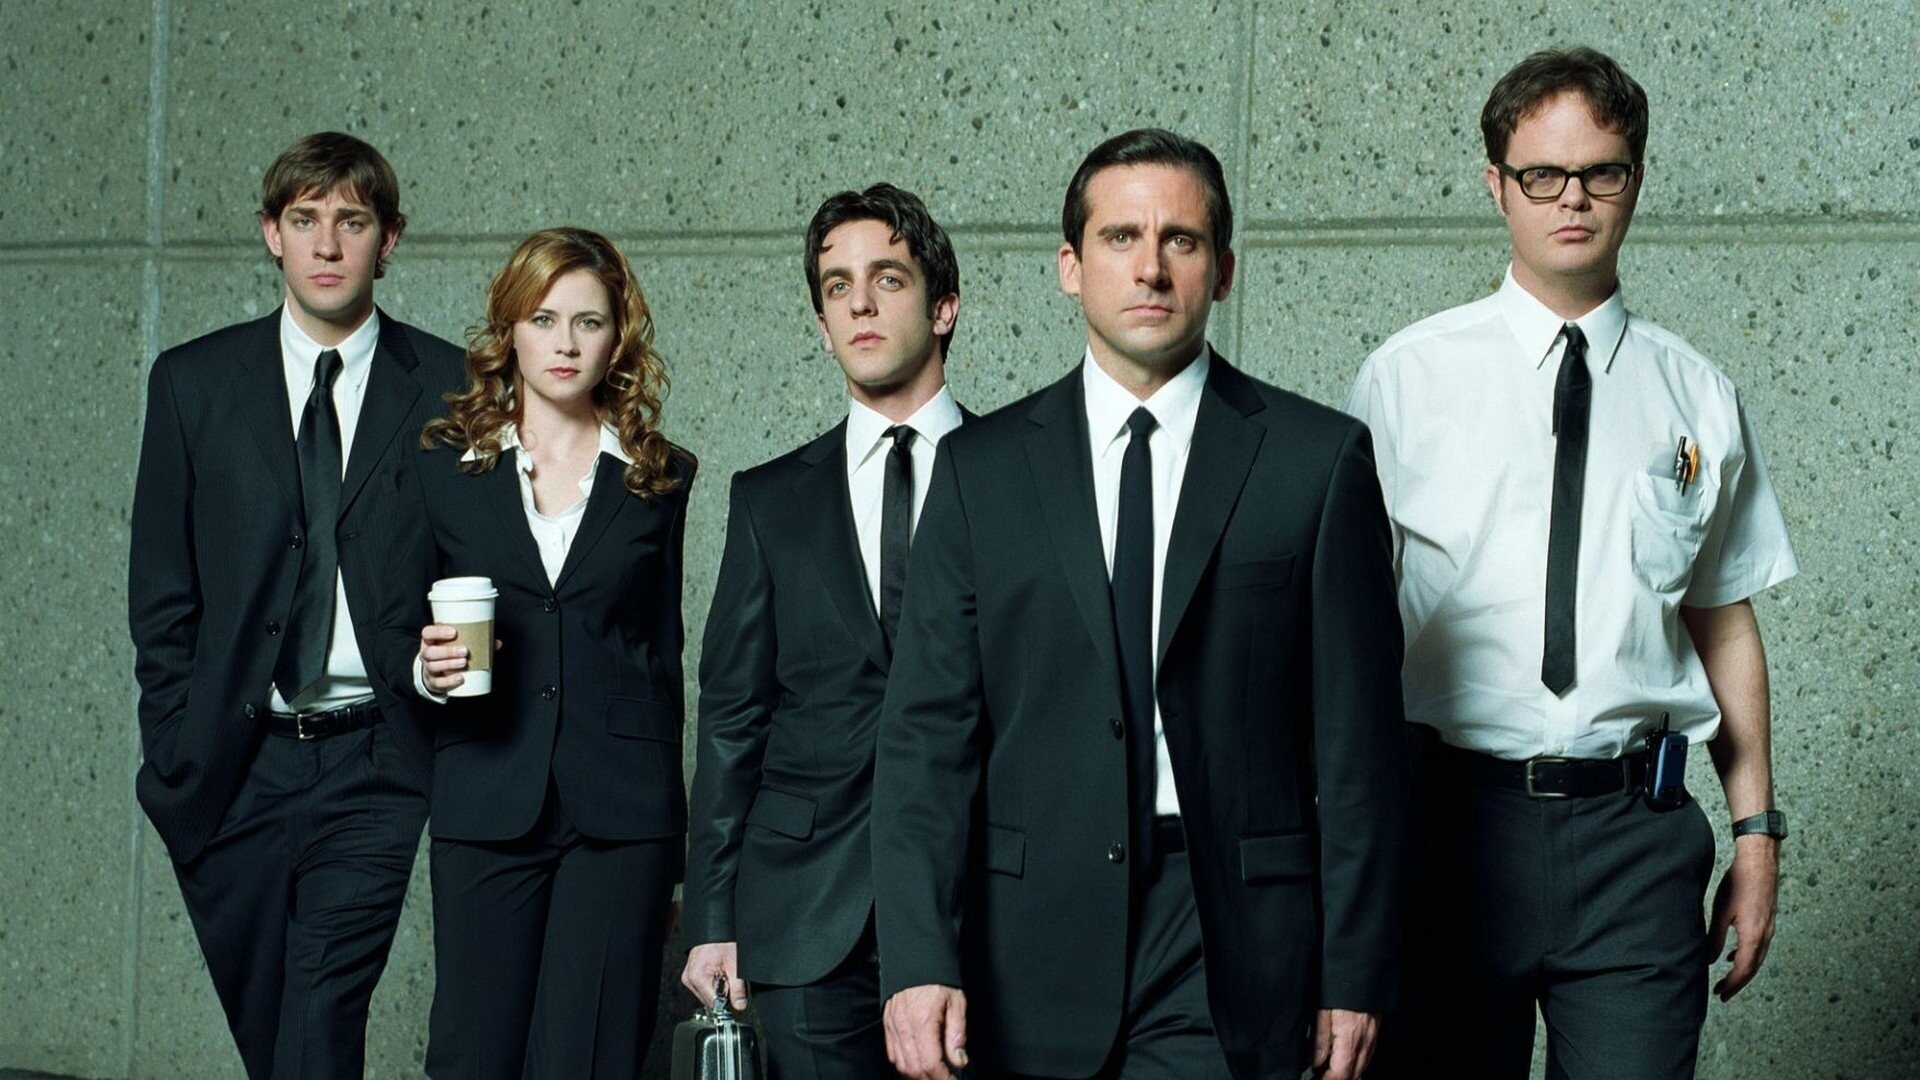 B.J. Novak: NBC Universal Television Distribution, The Office (TV Series) Cast, Release date - March 24, 2005. 1920x1080 Full HD Background.